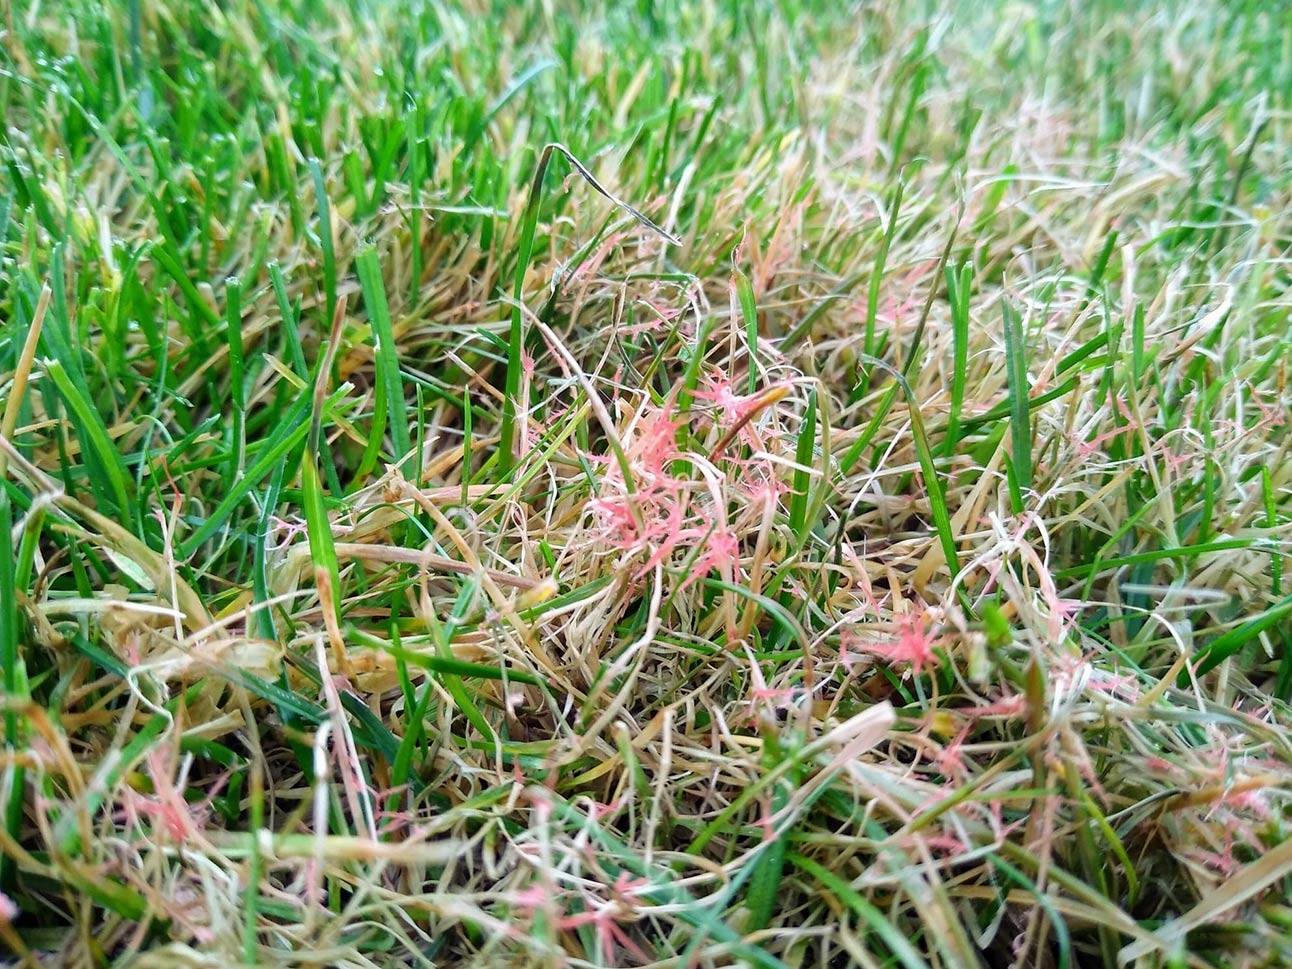 Red Thread Infested Lawn